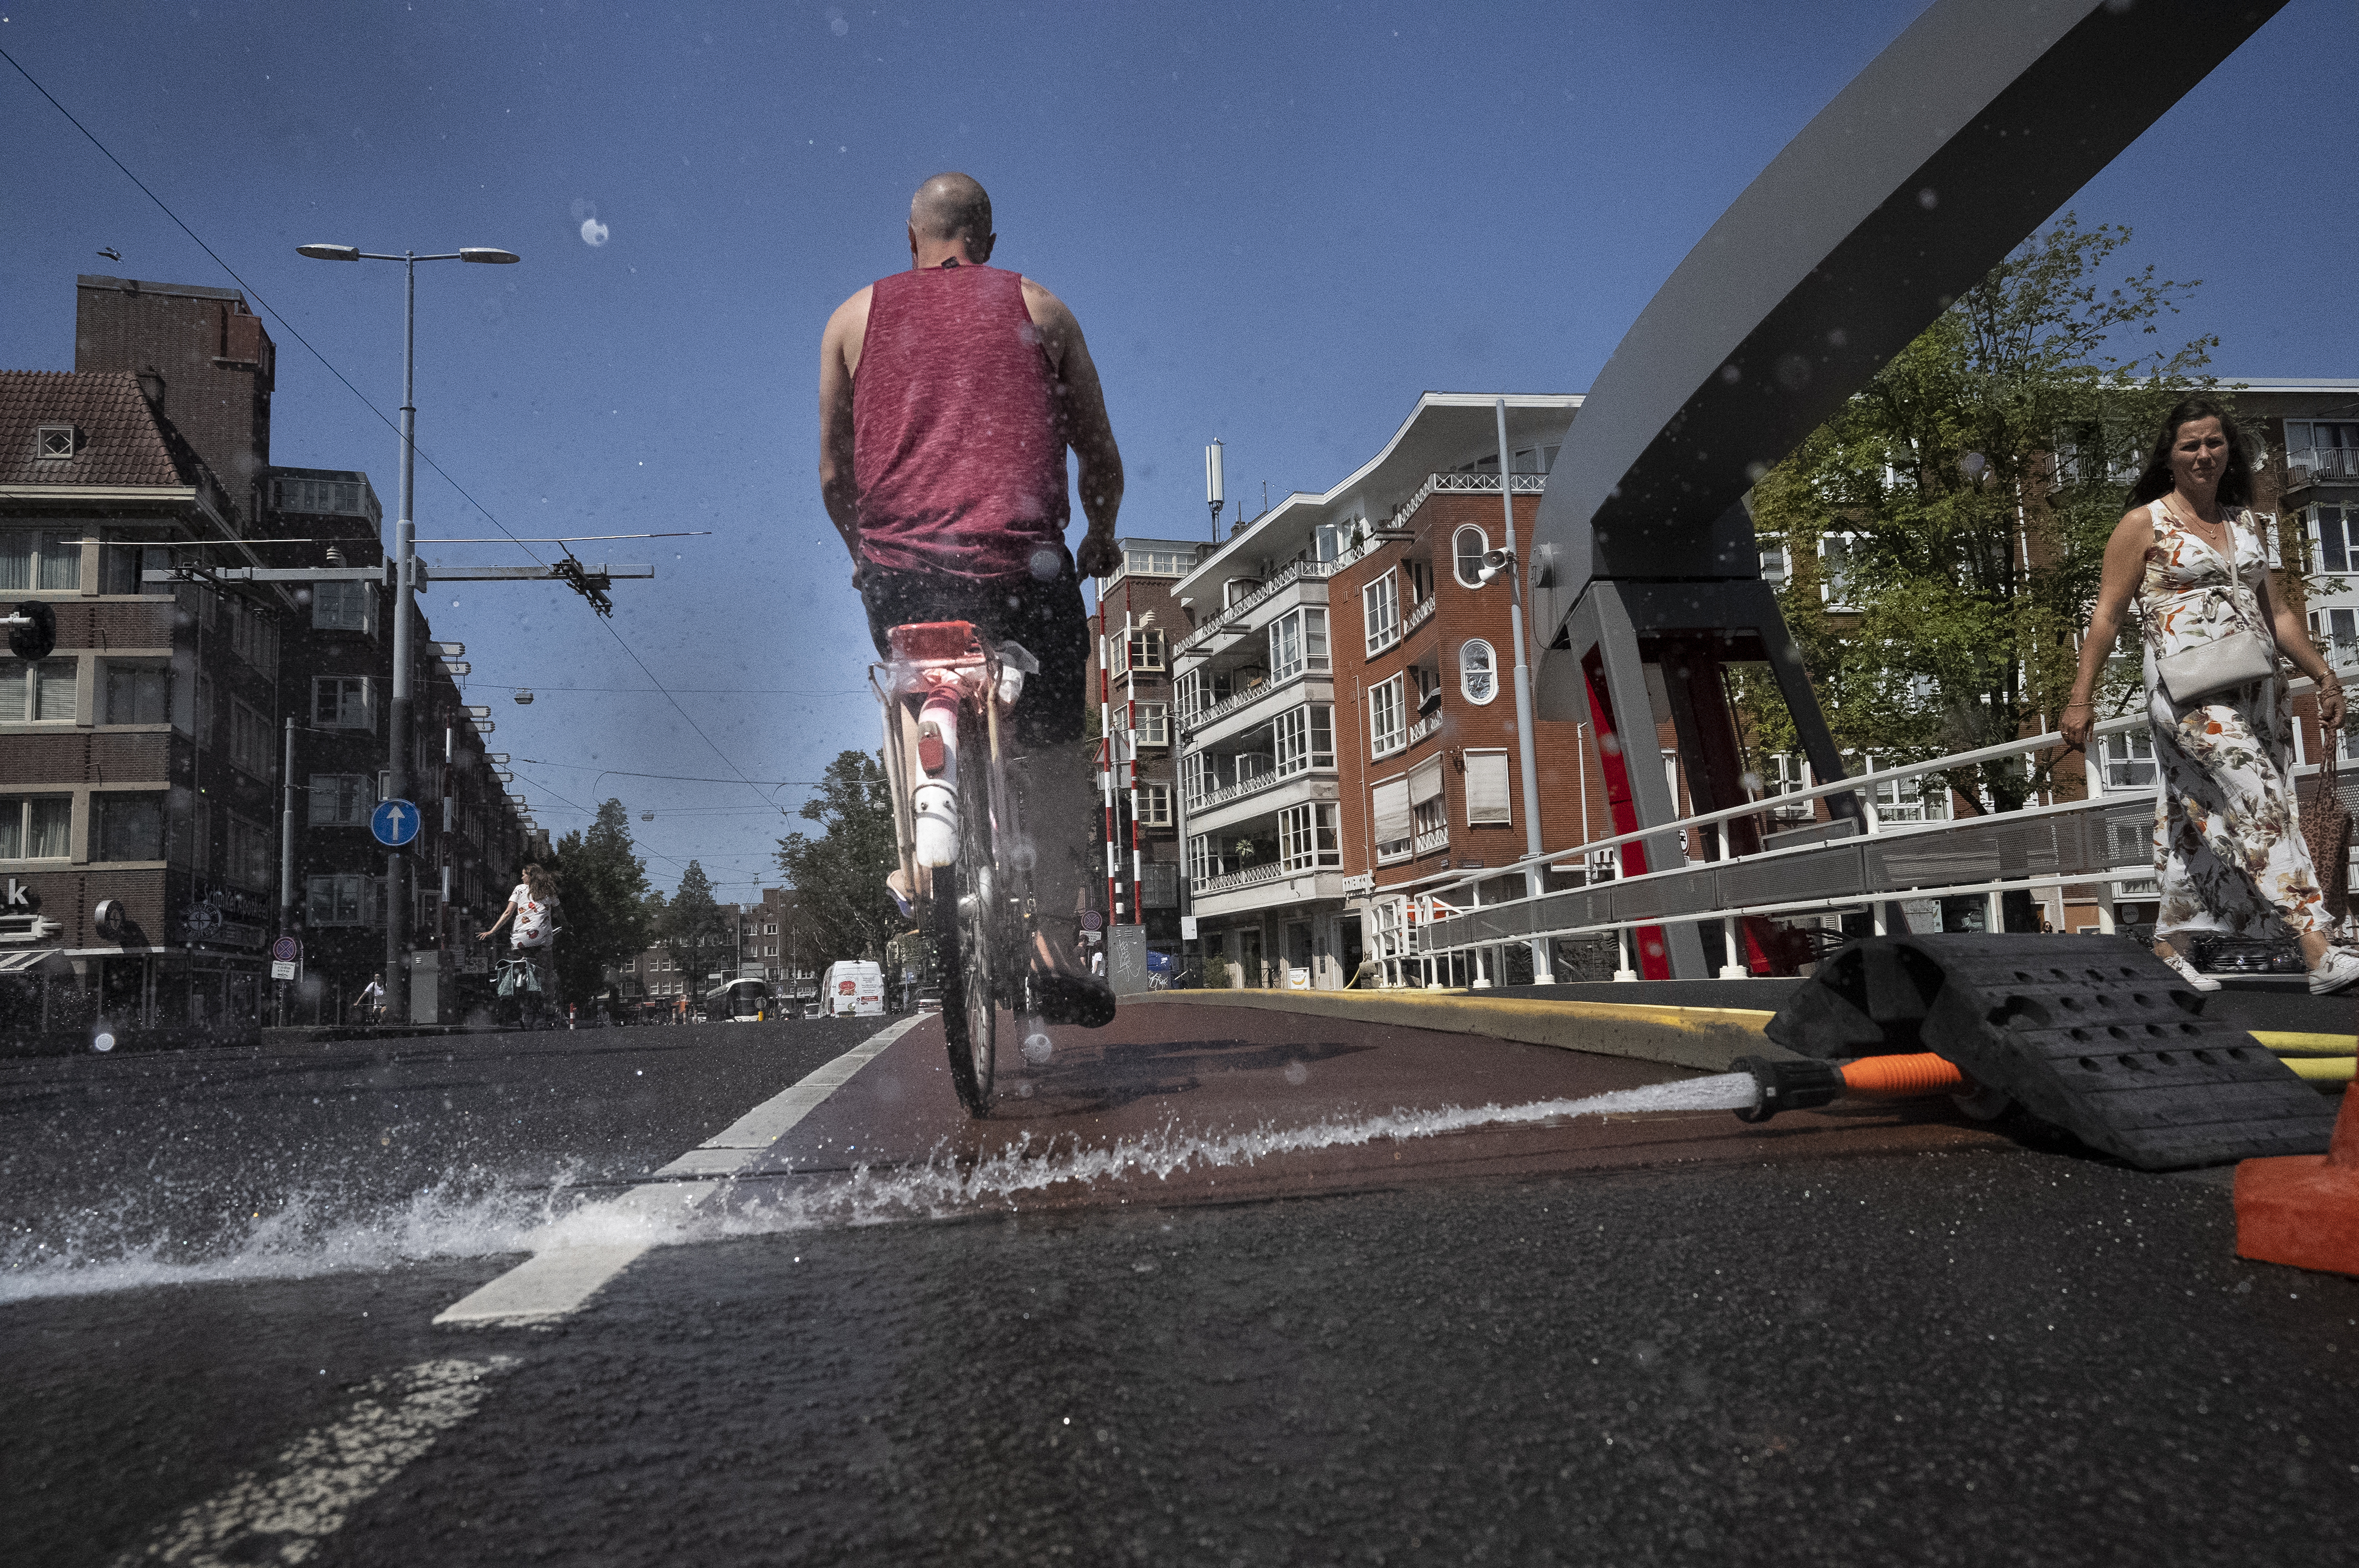 As the Dutch capital baked in the heat, municipal workers sprayed water on bridges over the city's canals to prevent metal in the constructions expanding which can jam them shut blocking boat traffic in Amsterdam